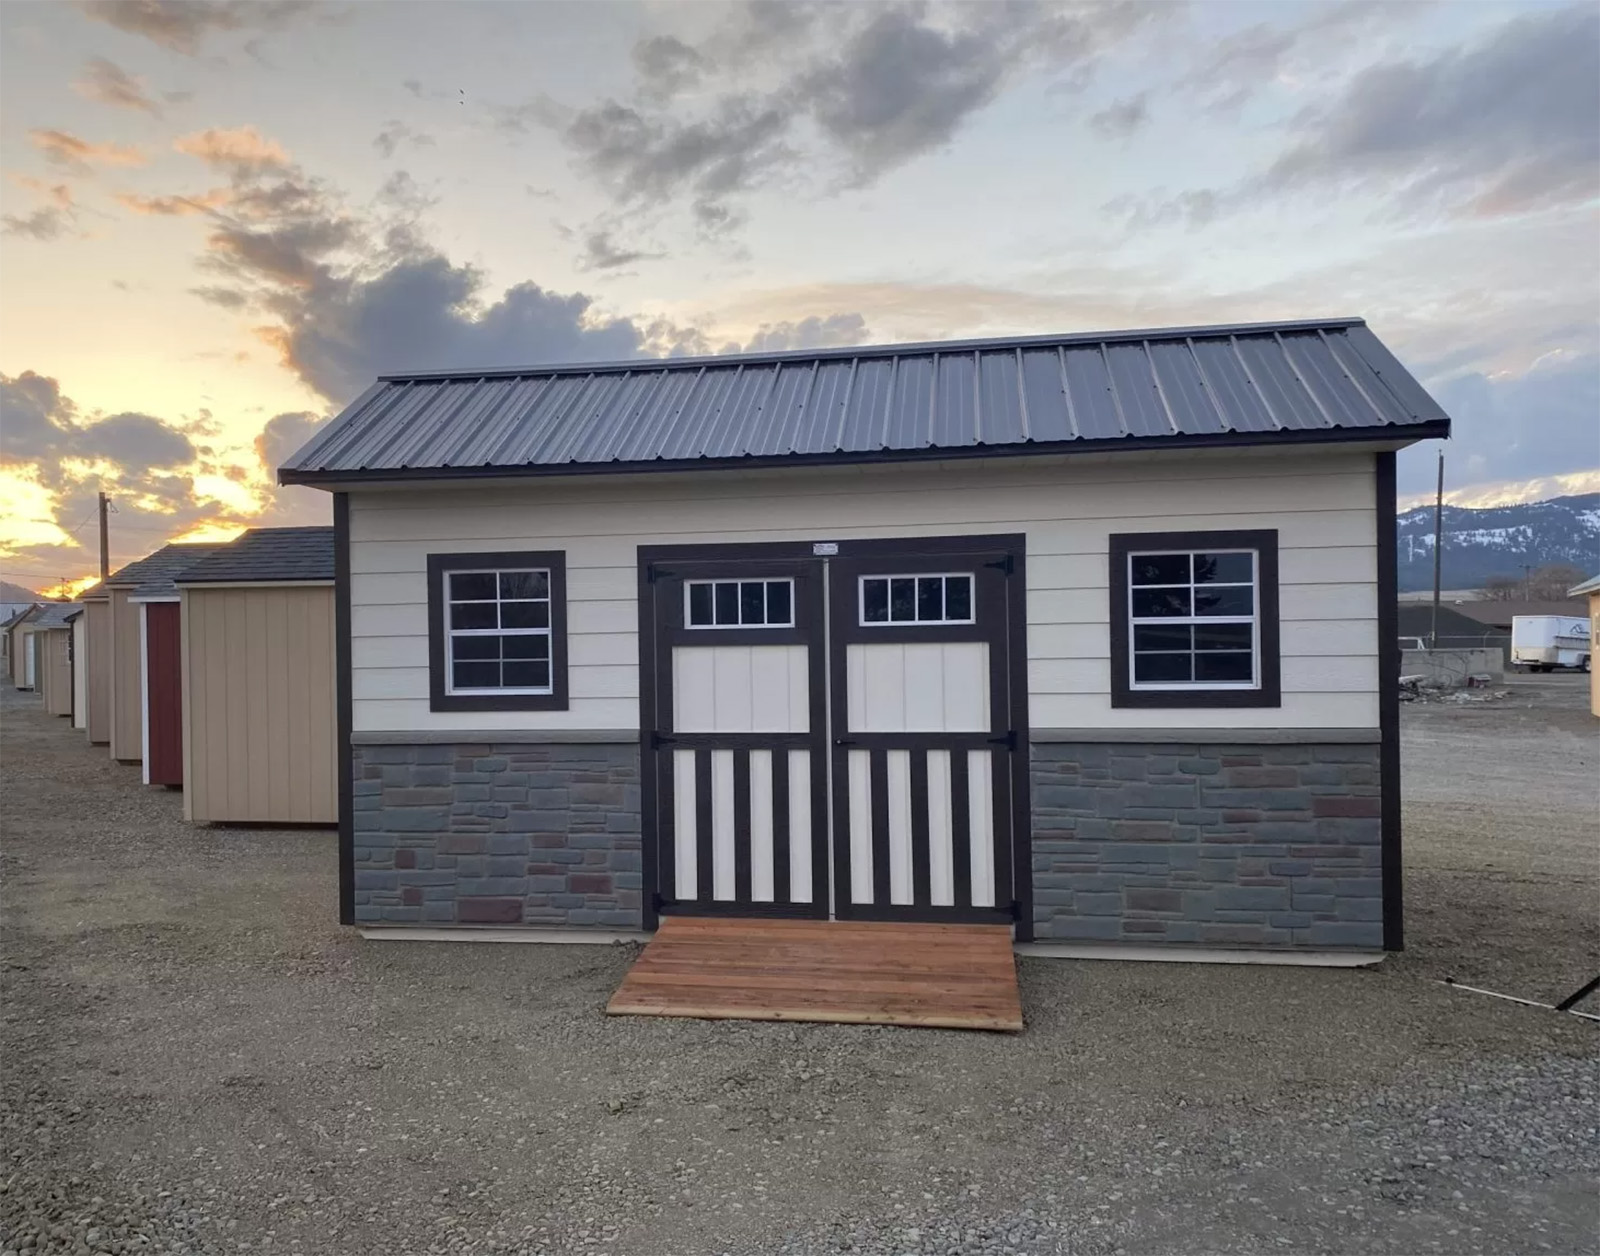 12x12 sheds for sale in oregon